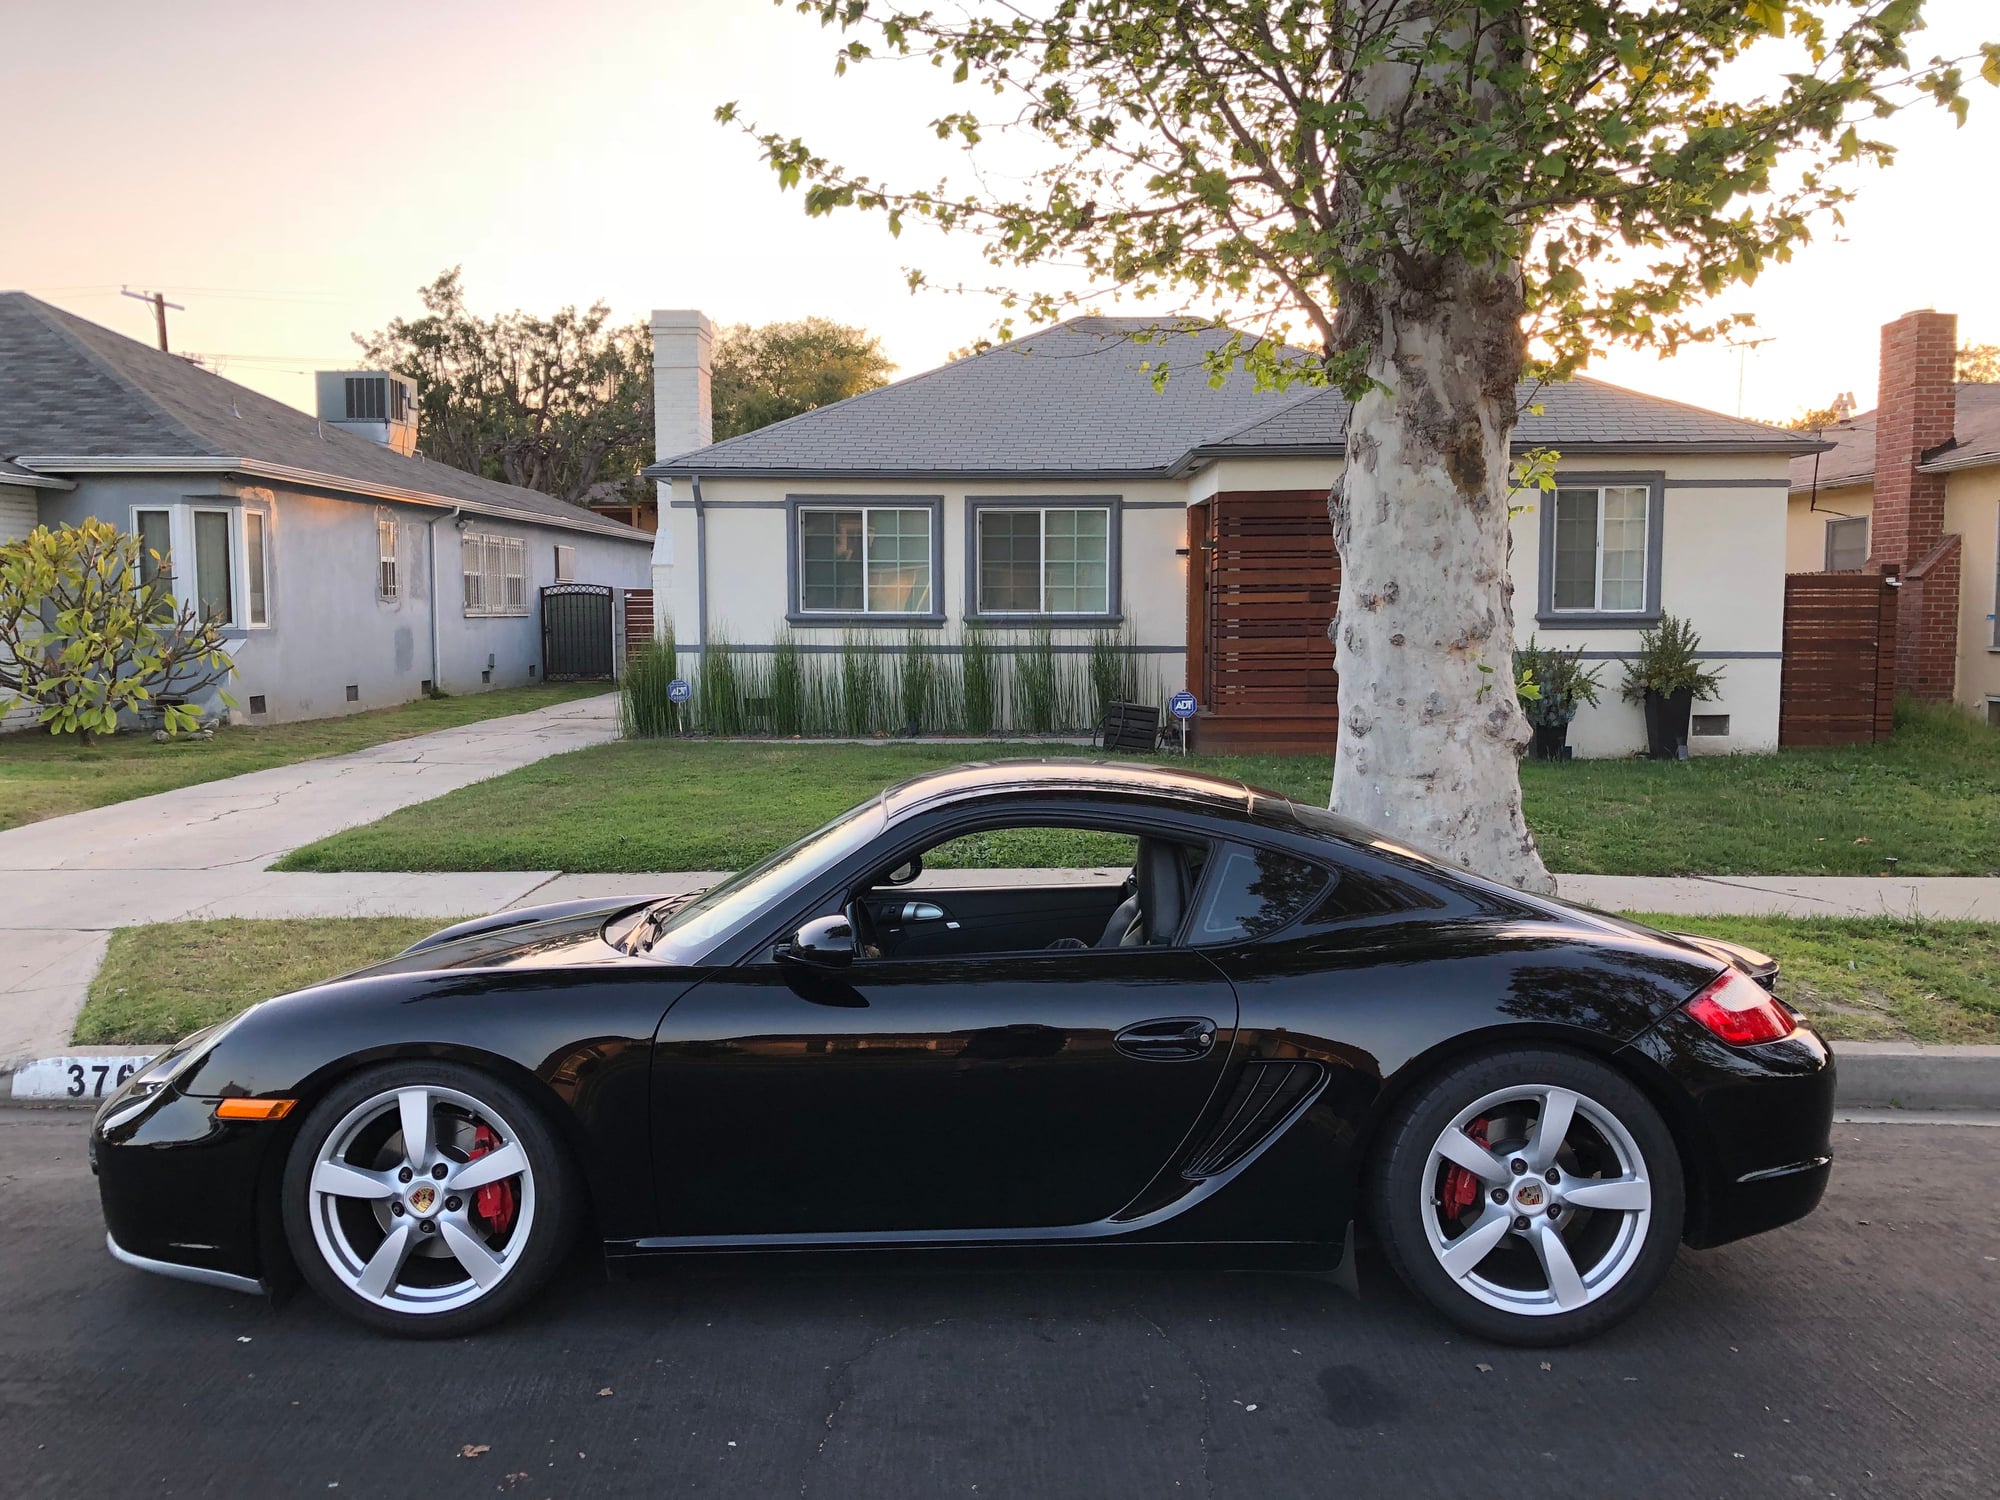 2006 Porsche Cayman - 2006 Porsche Cayman S-Sport Adaptive Seats+ GMG maintained - Used - VIN WP0AB29896U785297 - 79,000 Miles - 6 cyl - 2WD - Manual - Coupe - Black - Culver City, CA 90016, United States